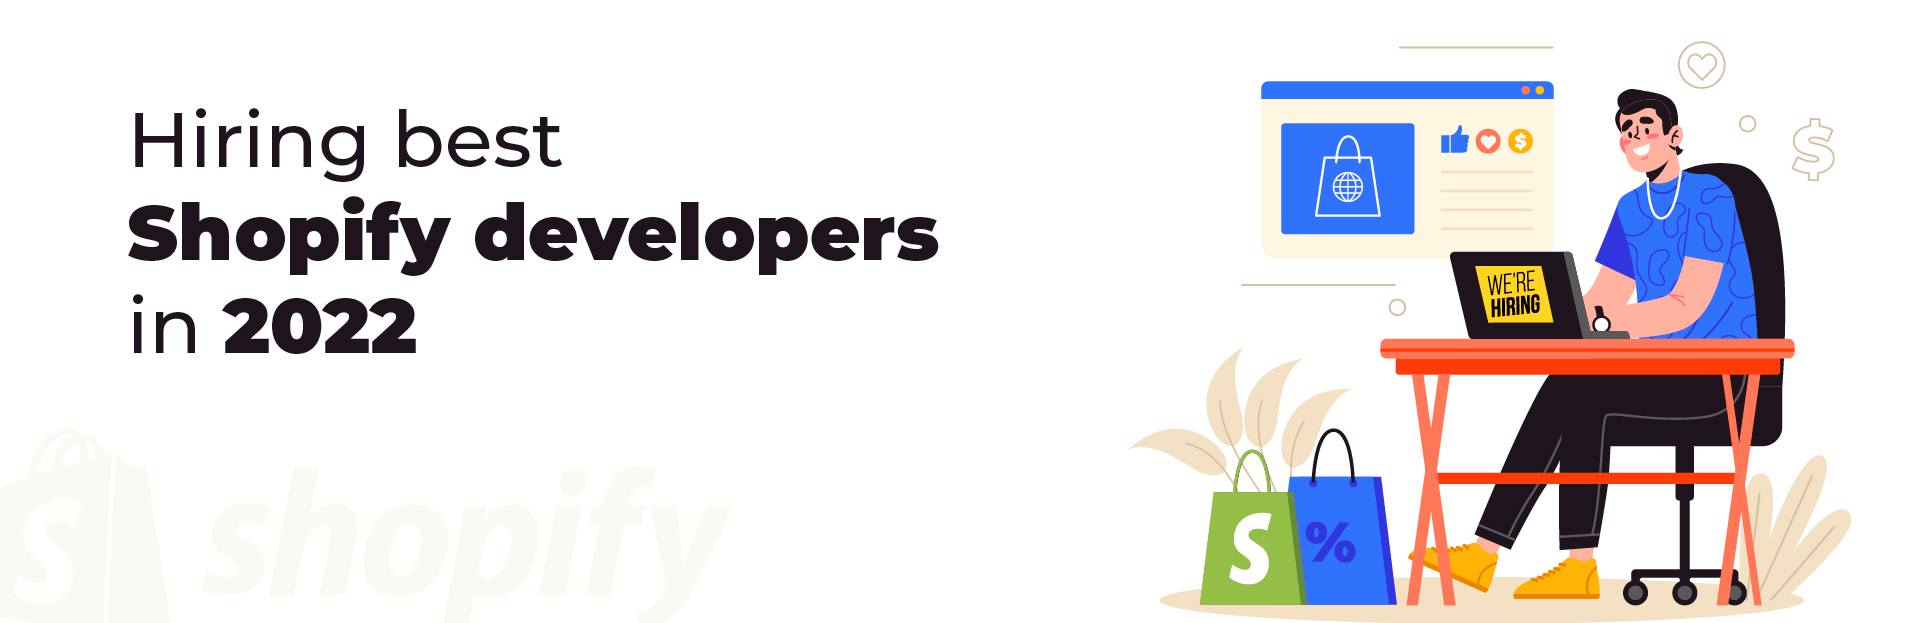 Hiring best Shopify Developers in 2022